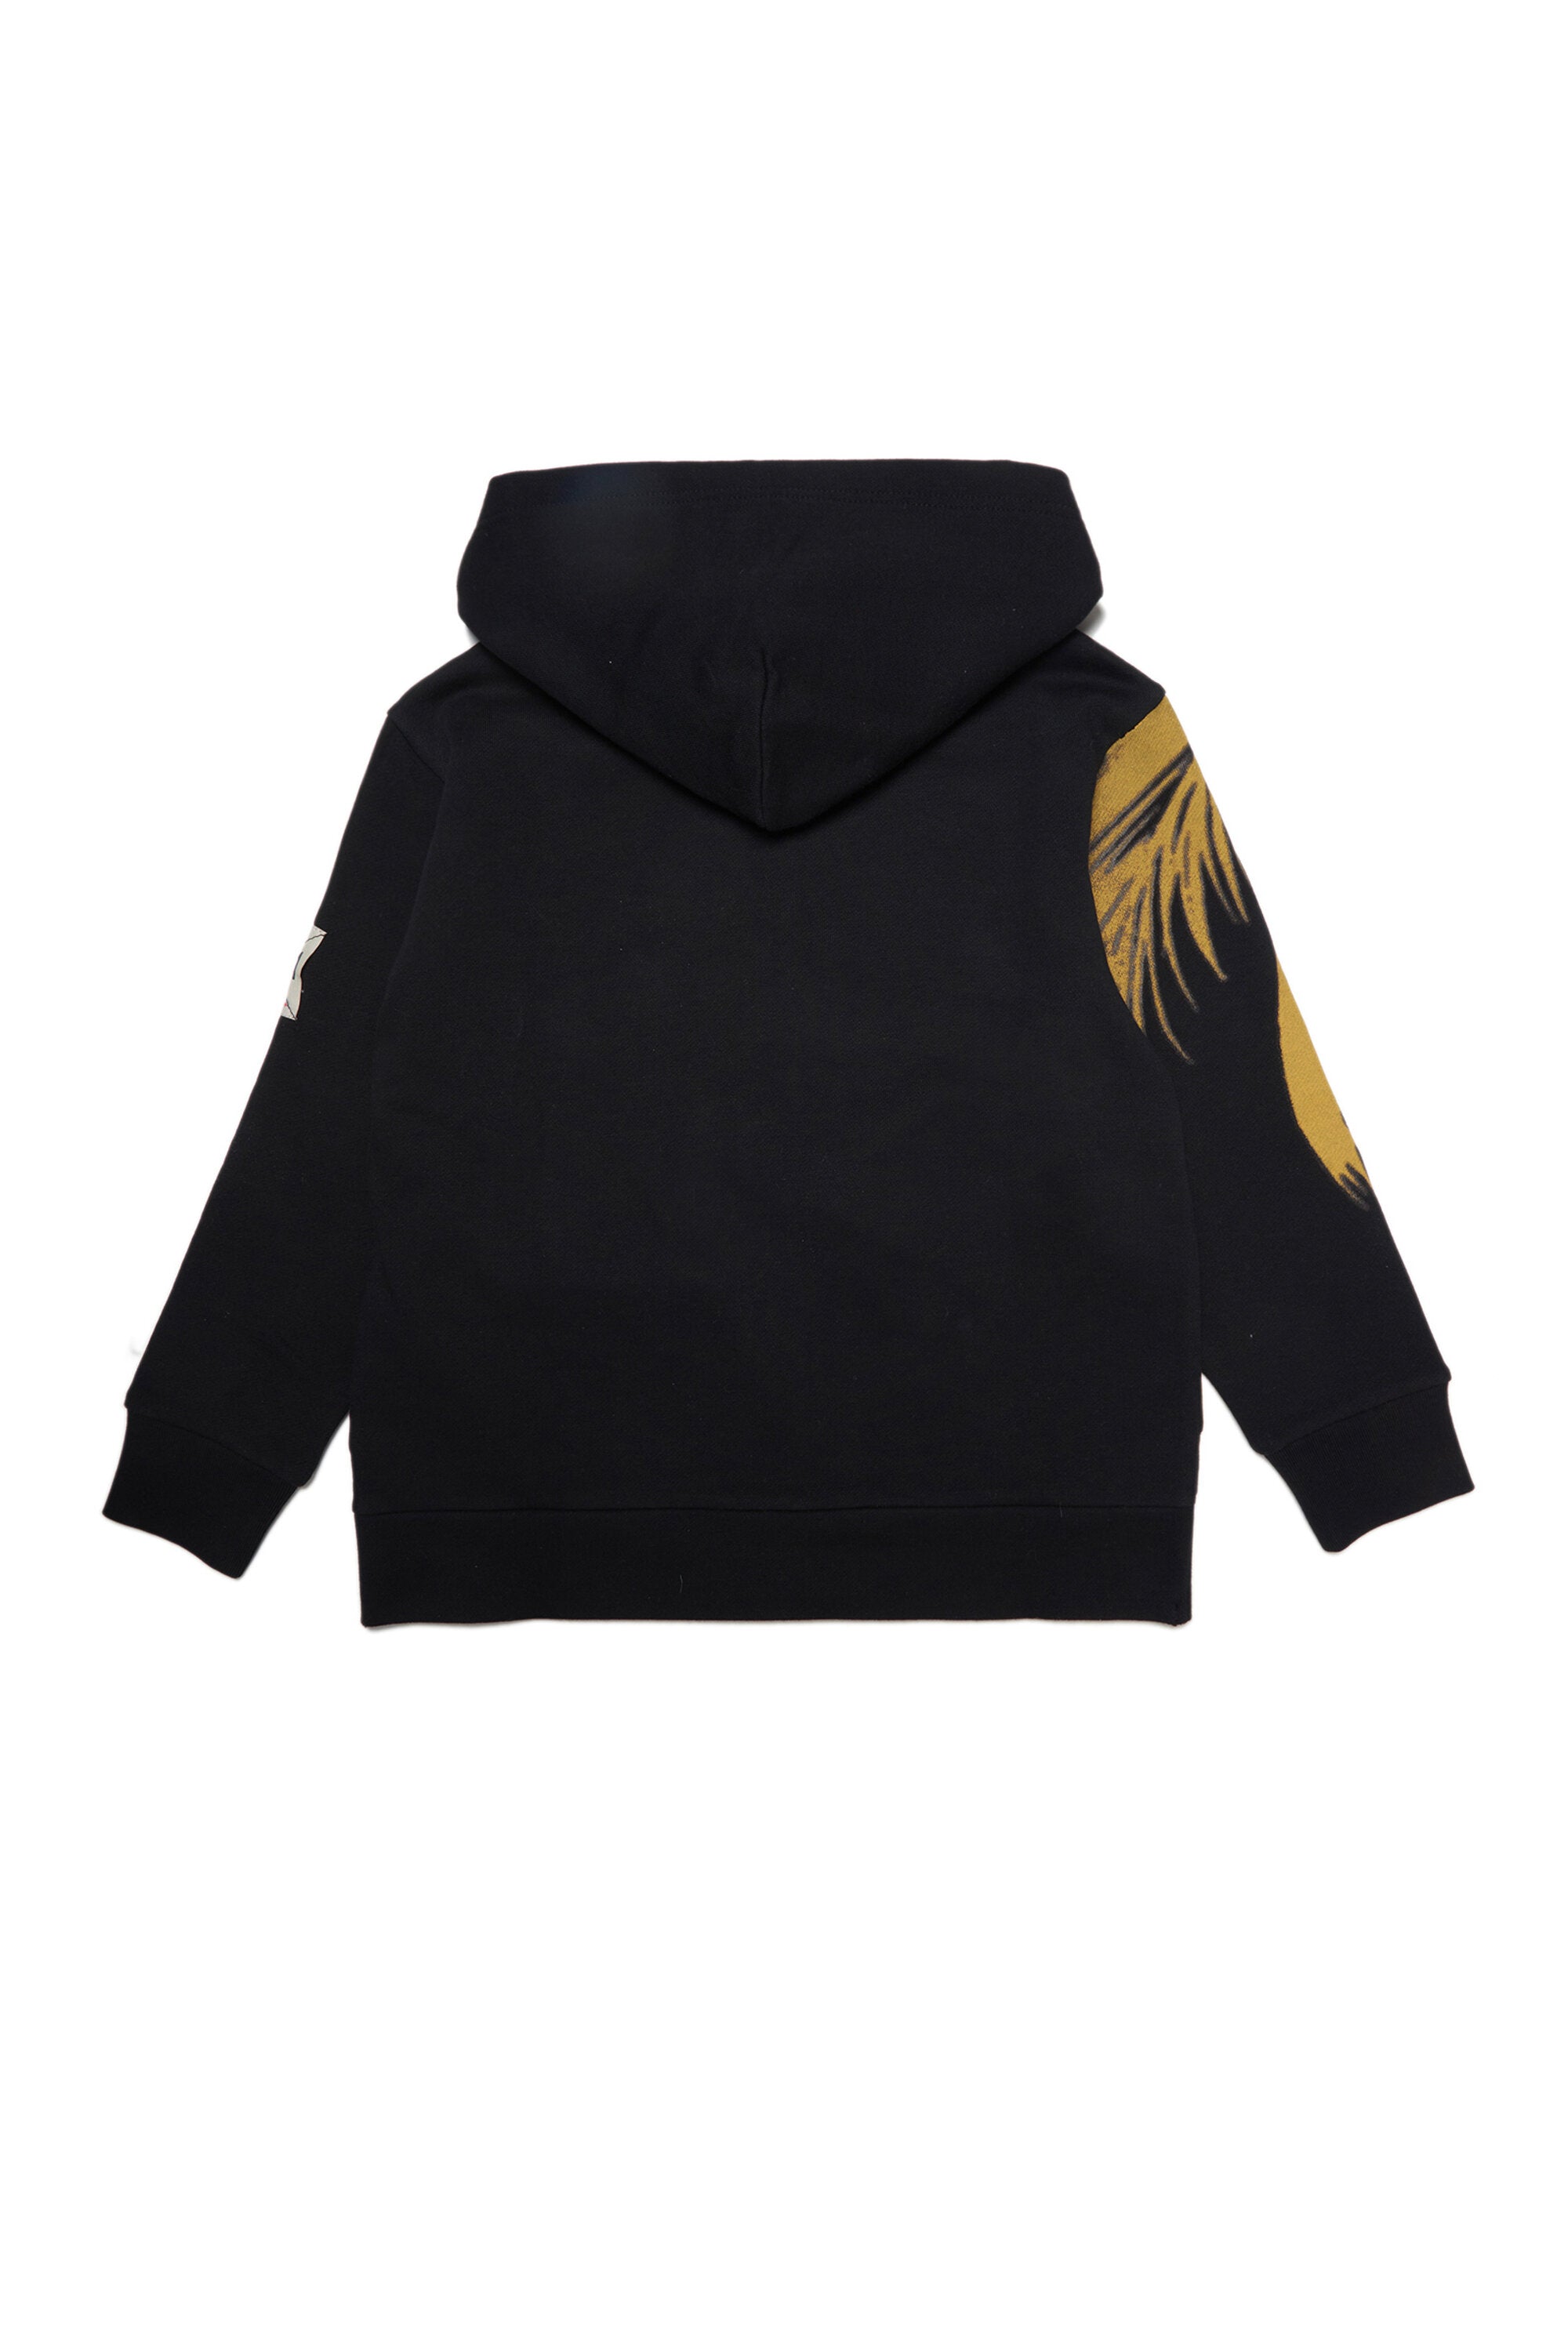 N°21 black cotton hooded sweatshirt with zip and summer print for children